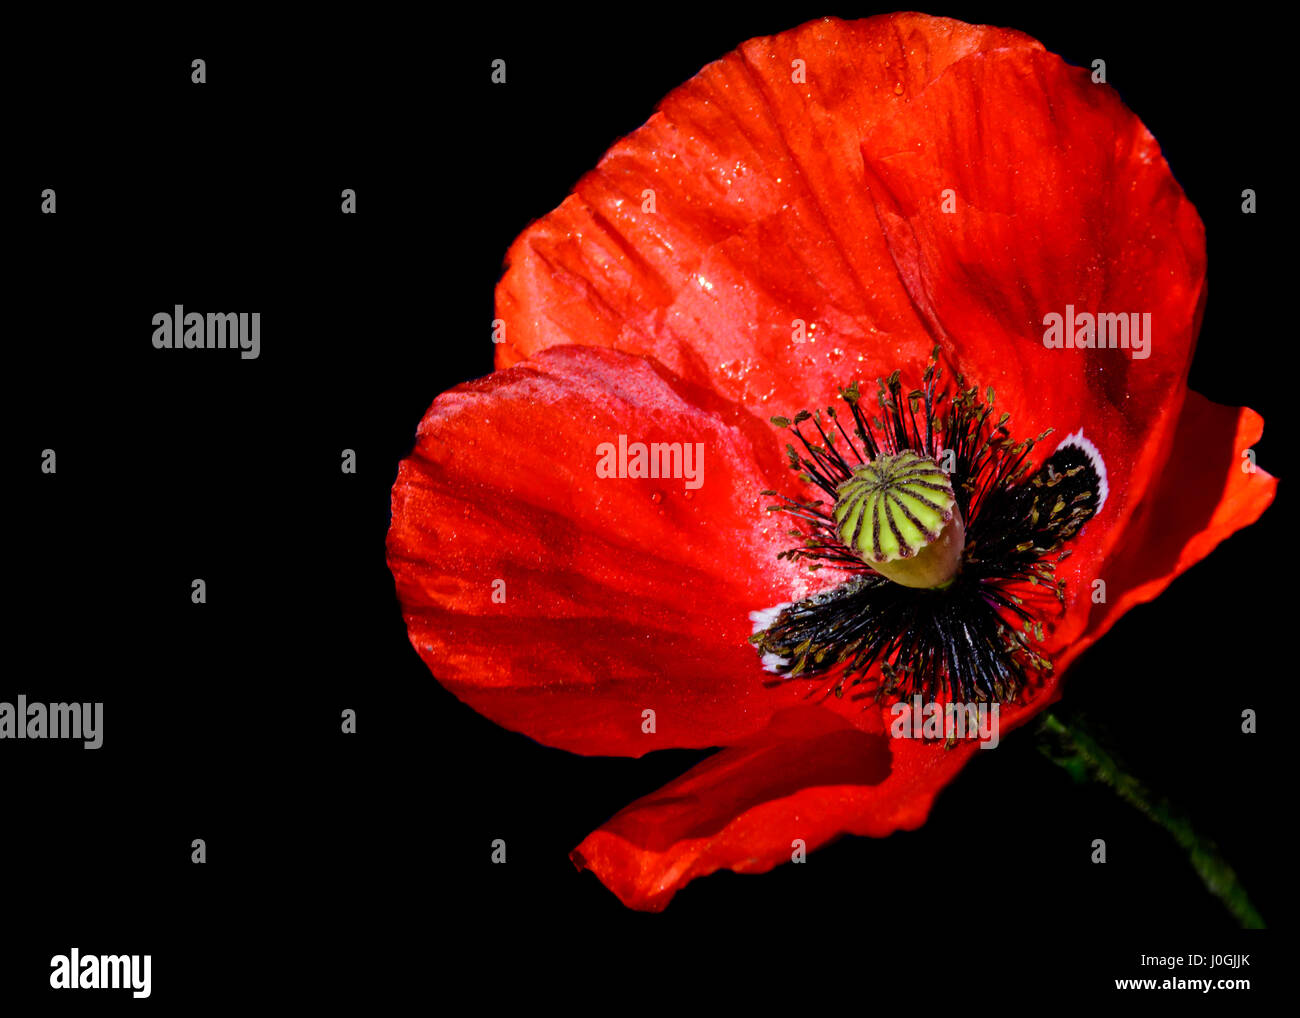 red Poppy (Papaver rhoeas) close-up against a black background Stock Photo